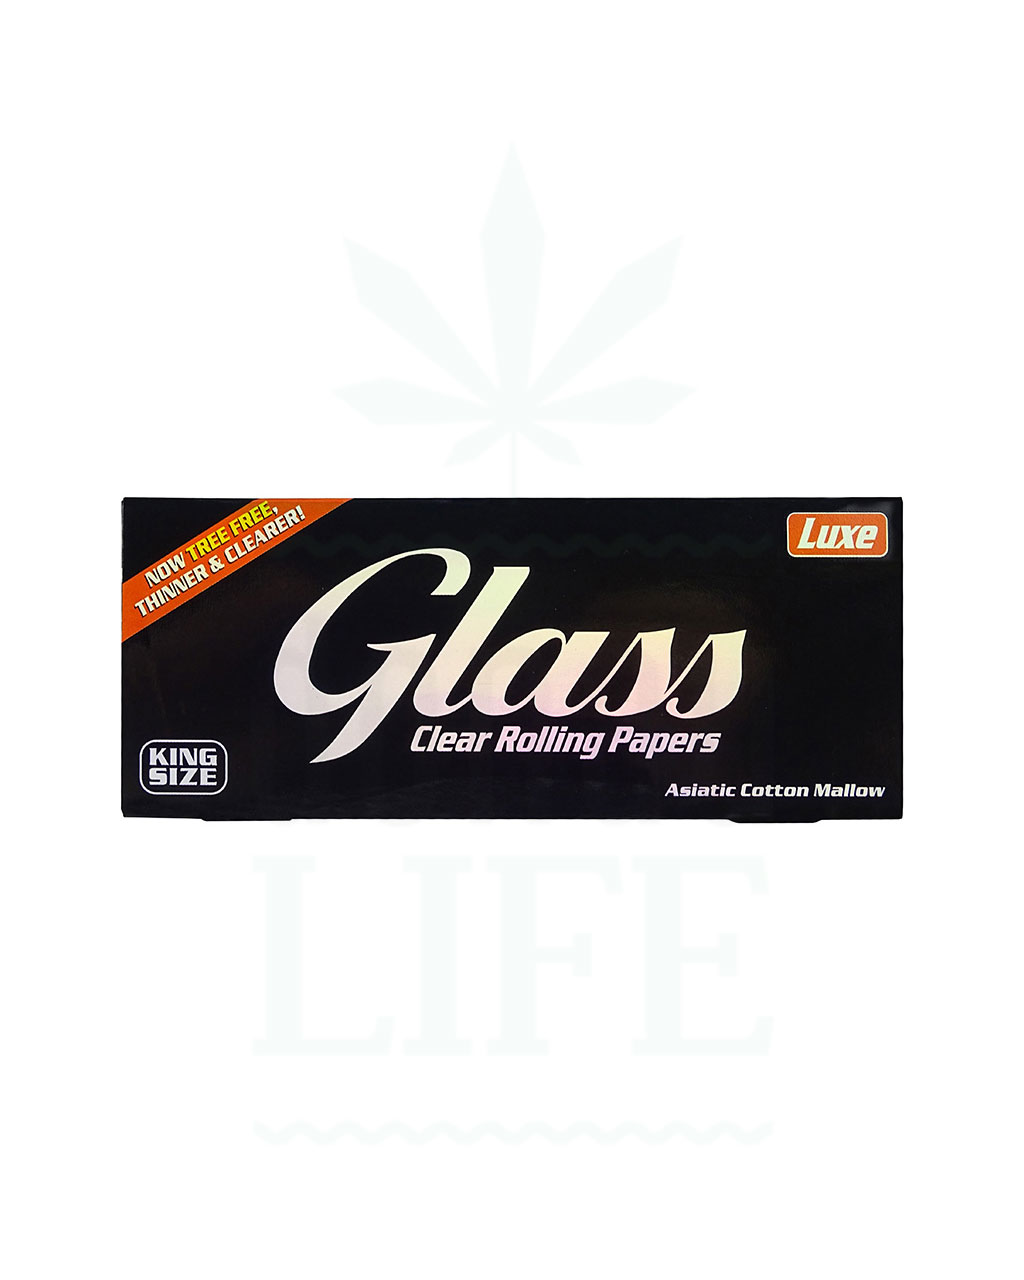 Headshop GLASS Papers King Size | transparent